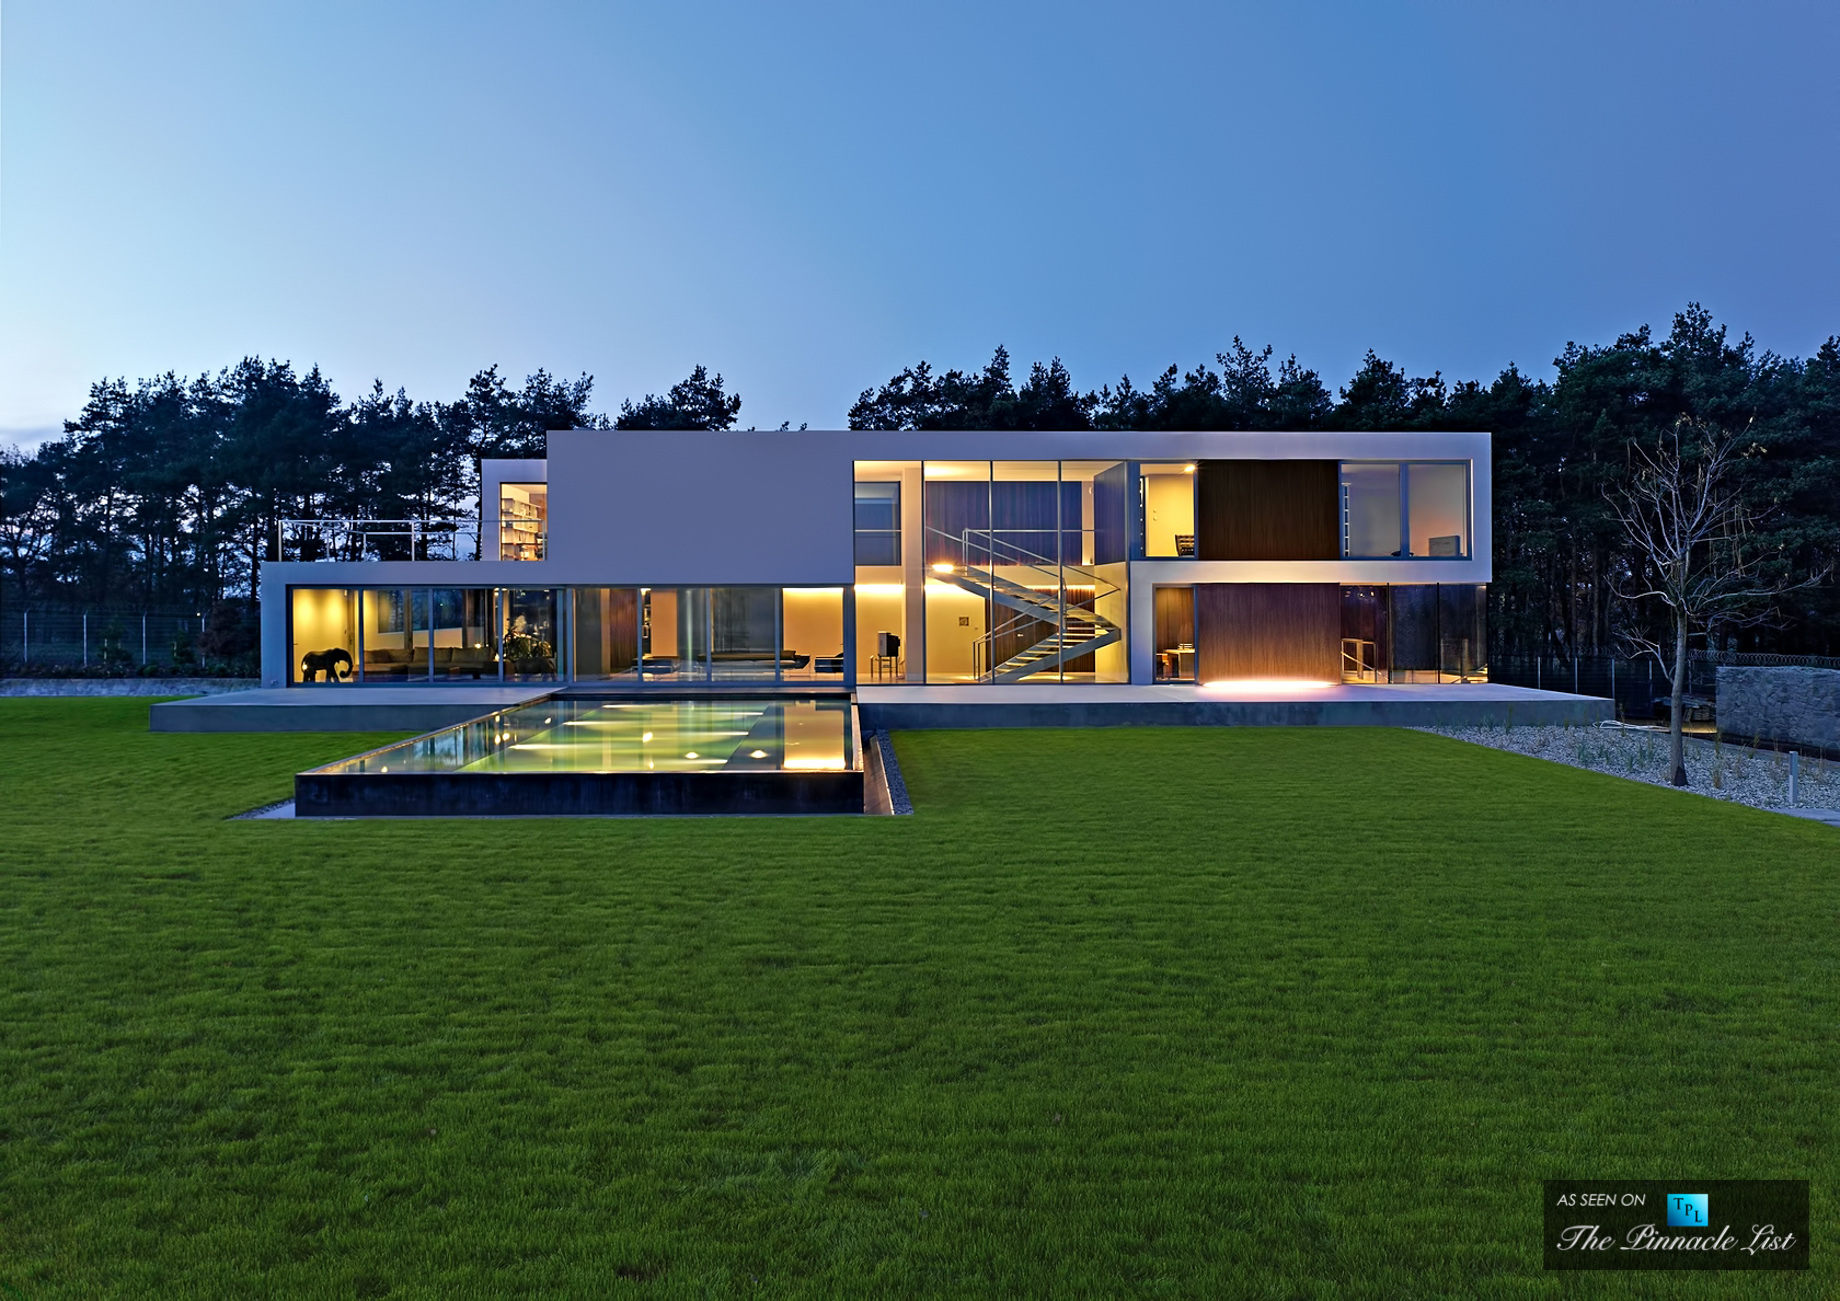 Concrete Cube Design with Minimalistic Expressions at the Aatrial House in Poland